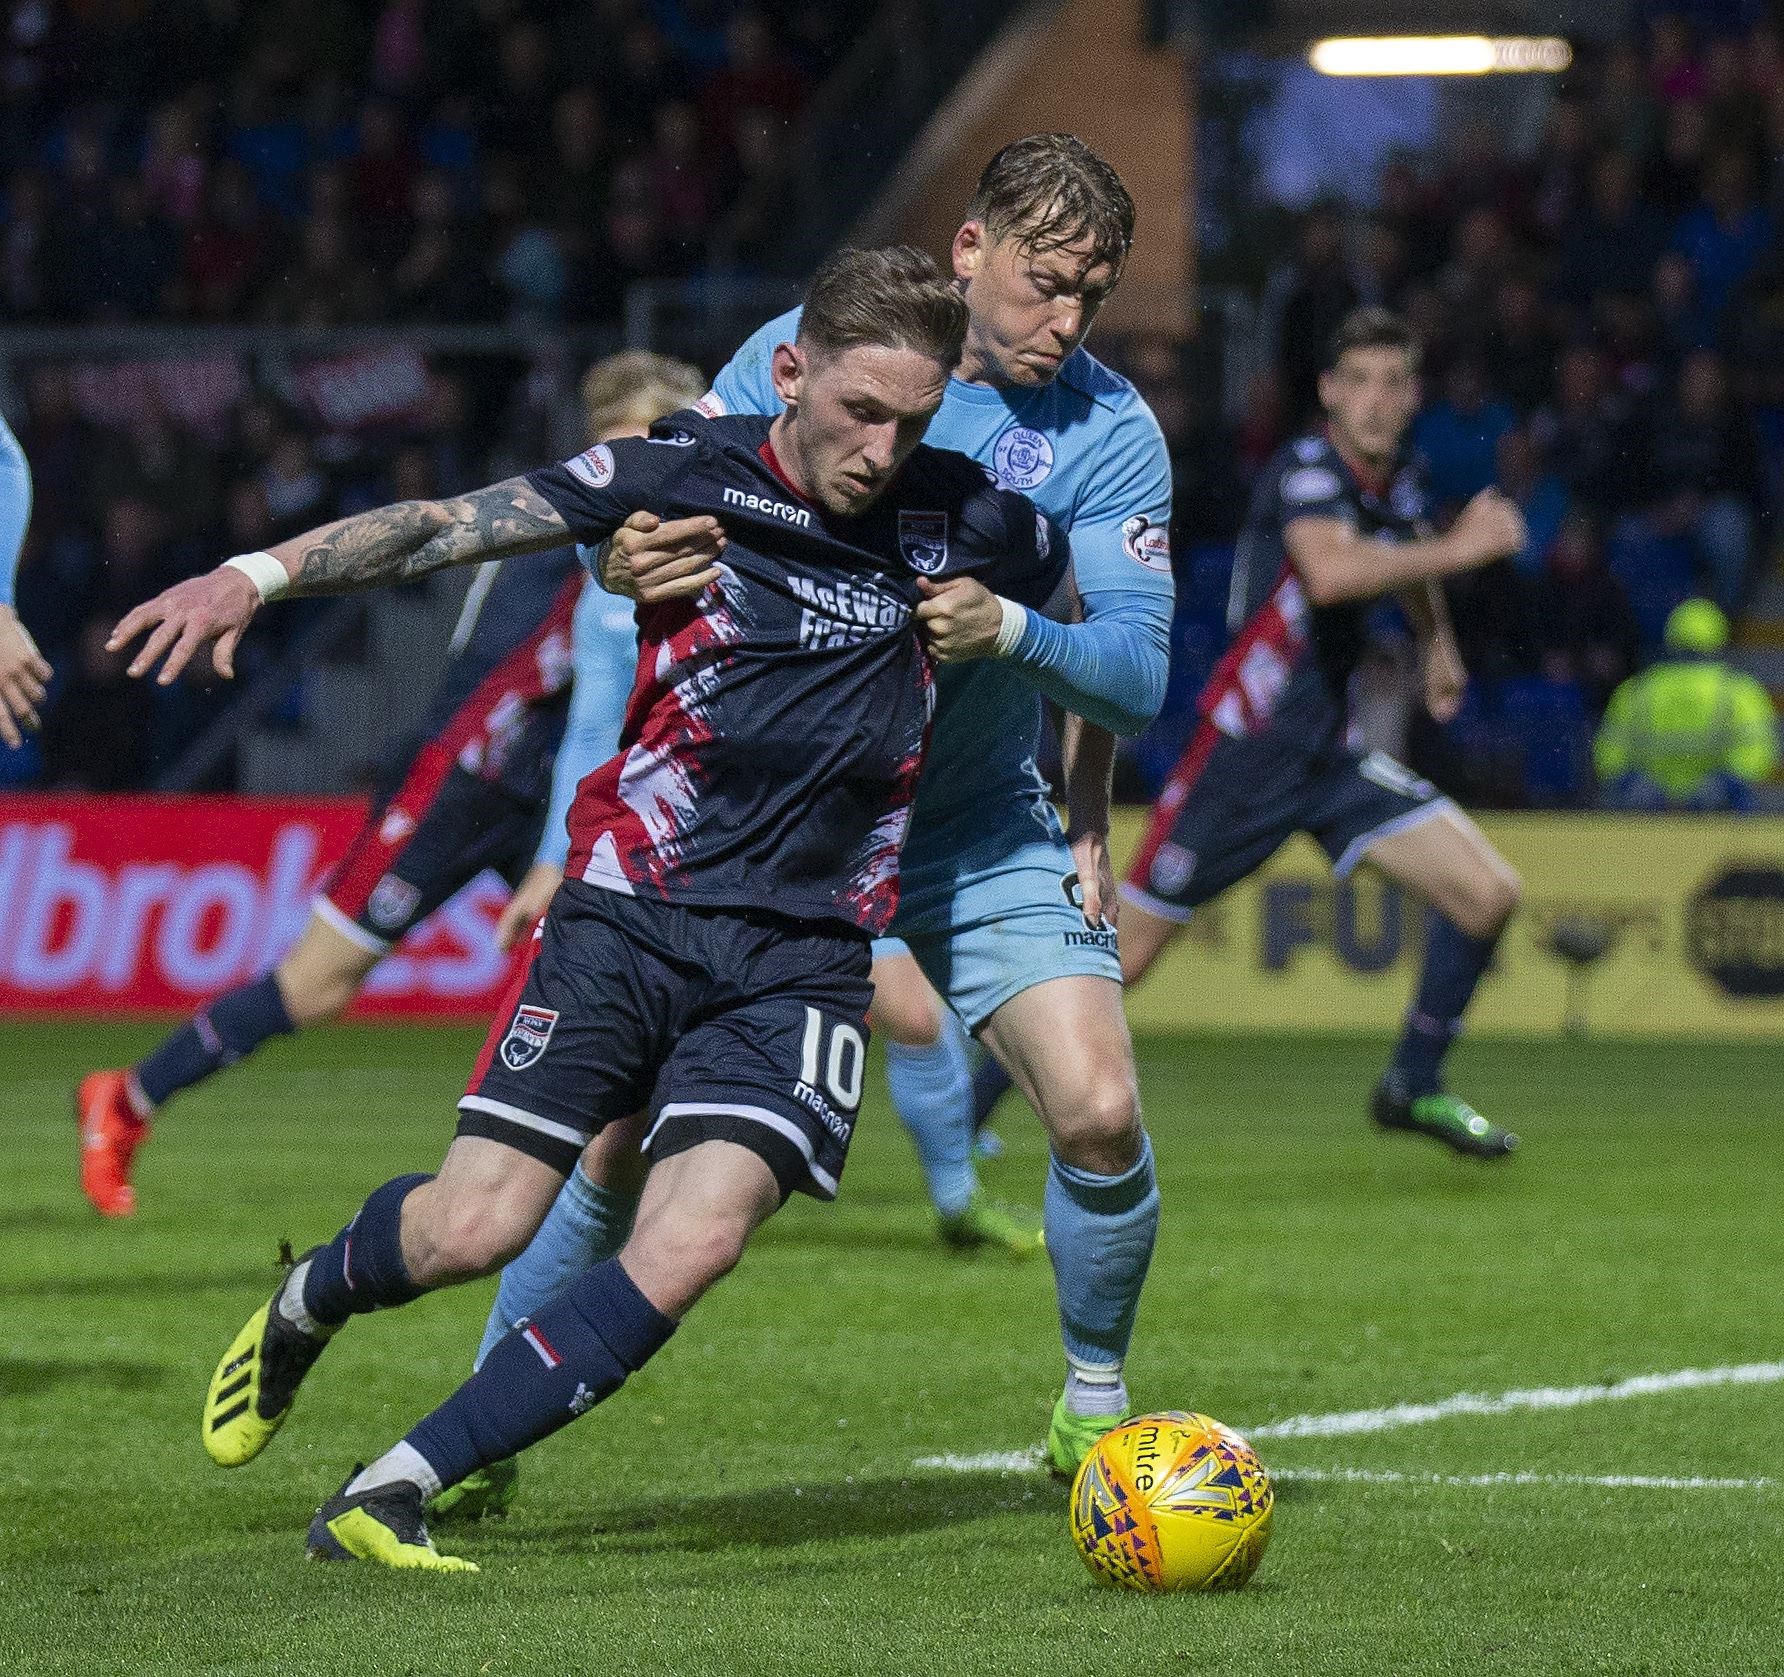 Declan McManus starred as Ross County thrashed Forres in their first pre-season friendly. Picture: Ken Macpherson